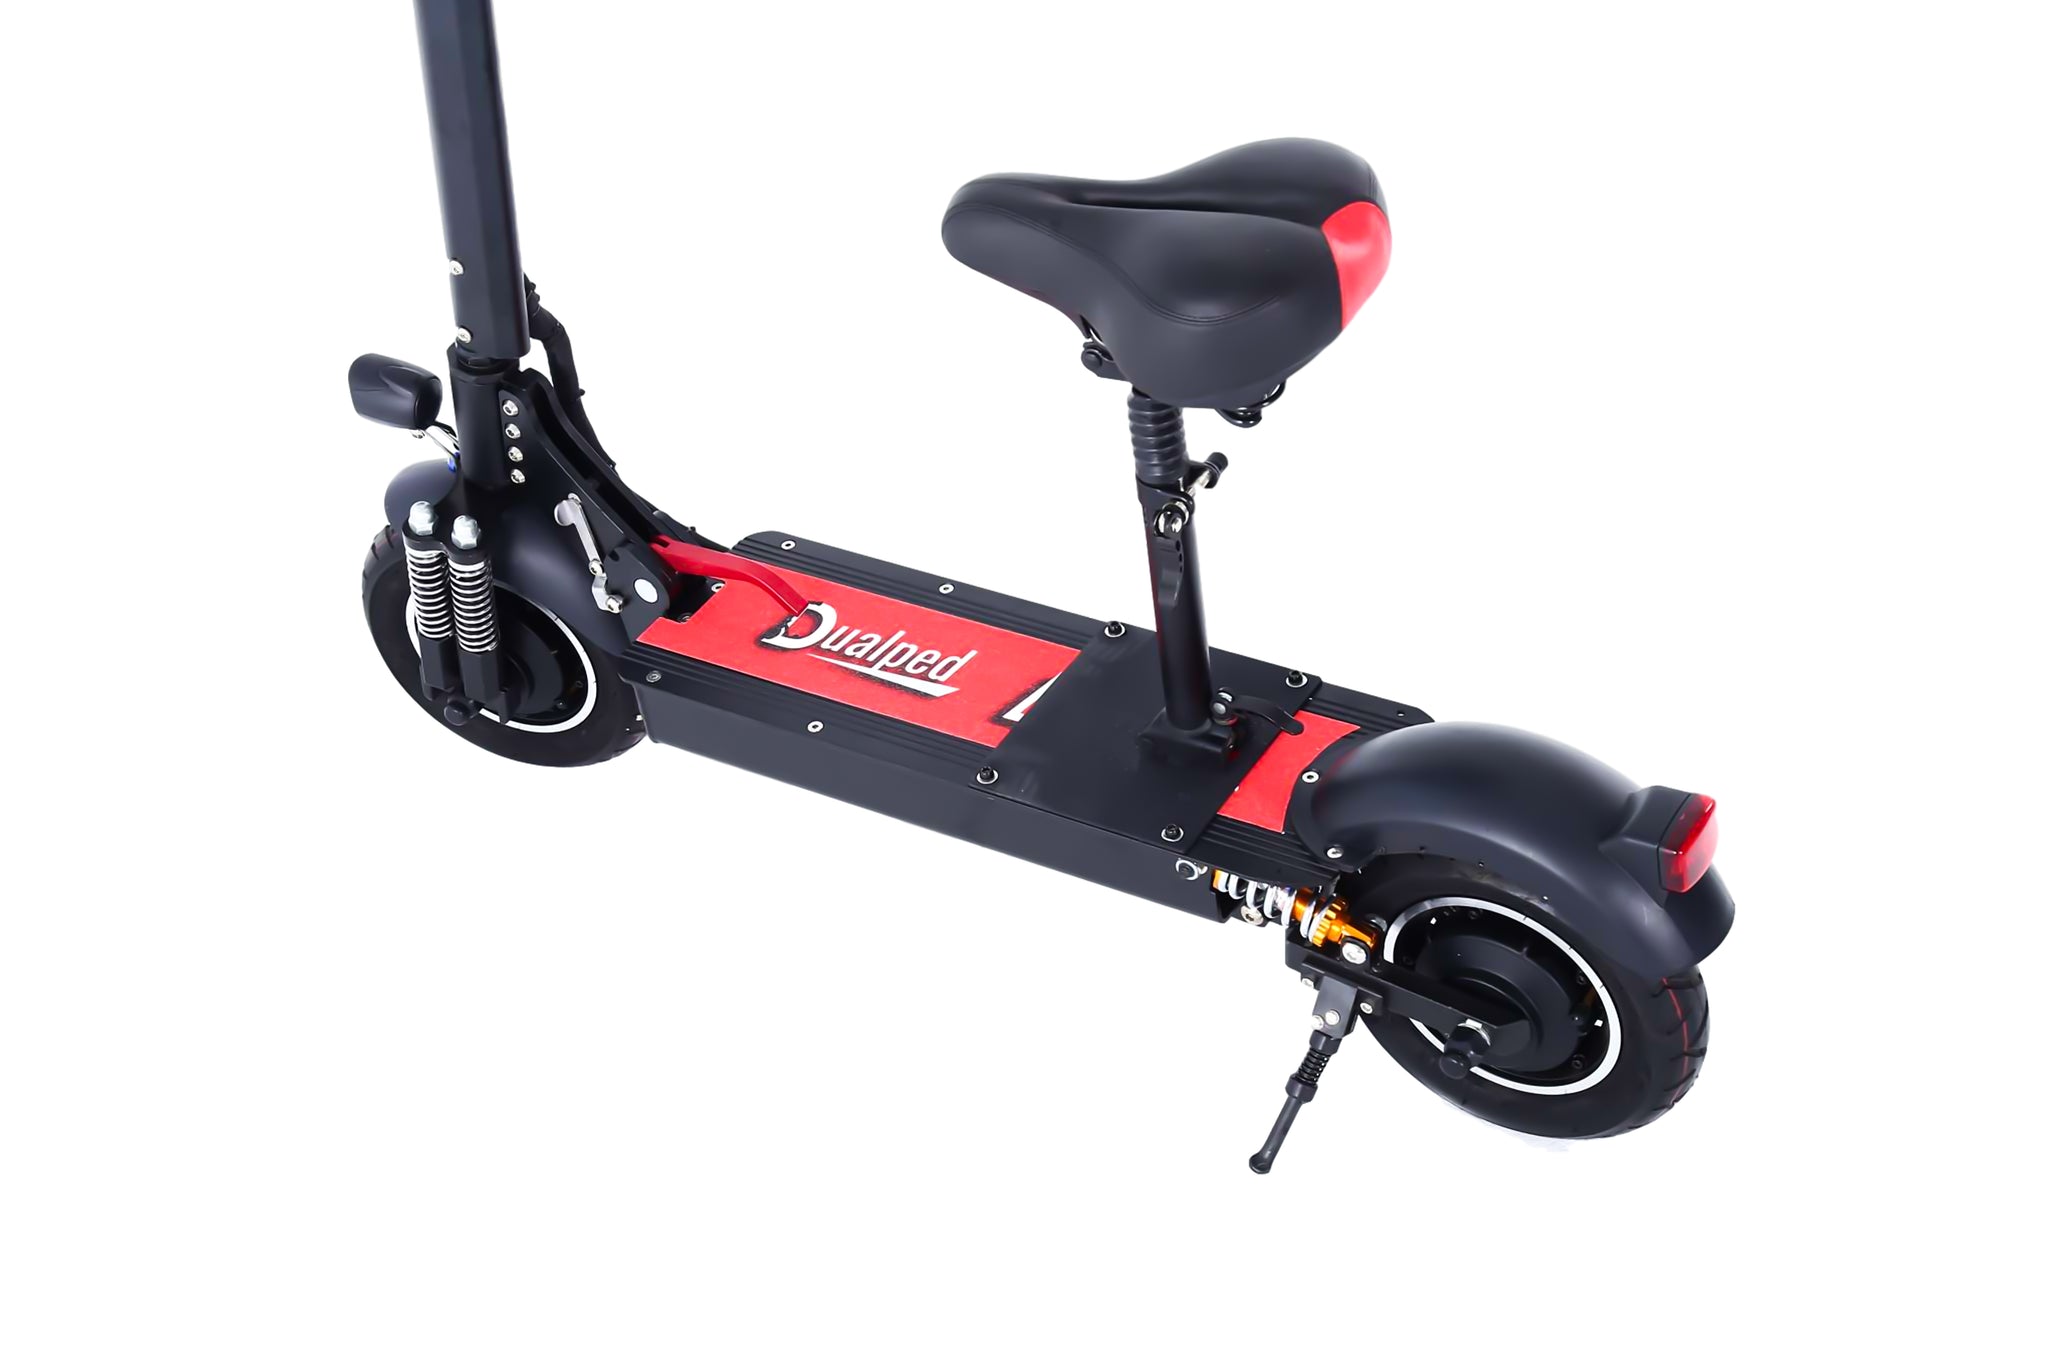 Dualped Diablo 52V Dual 2000W Dualped Proprietary Motors up to 75km/h 47mph ONLY $1599 USD available now